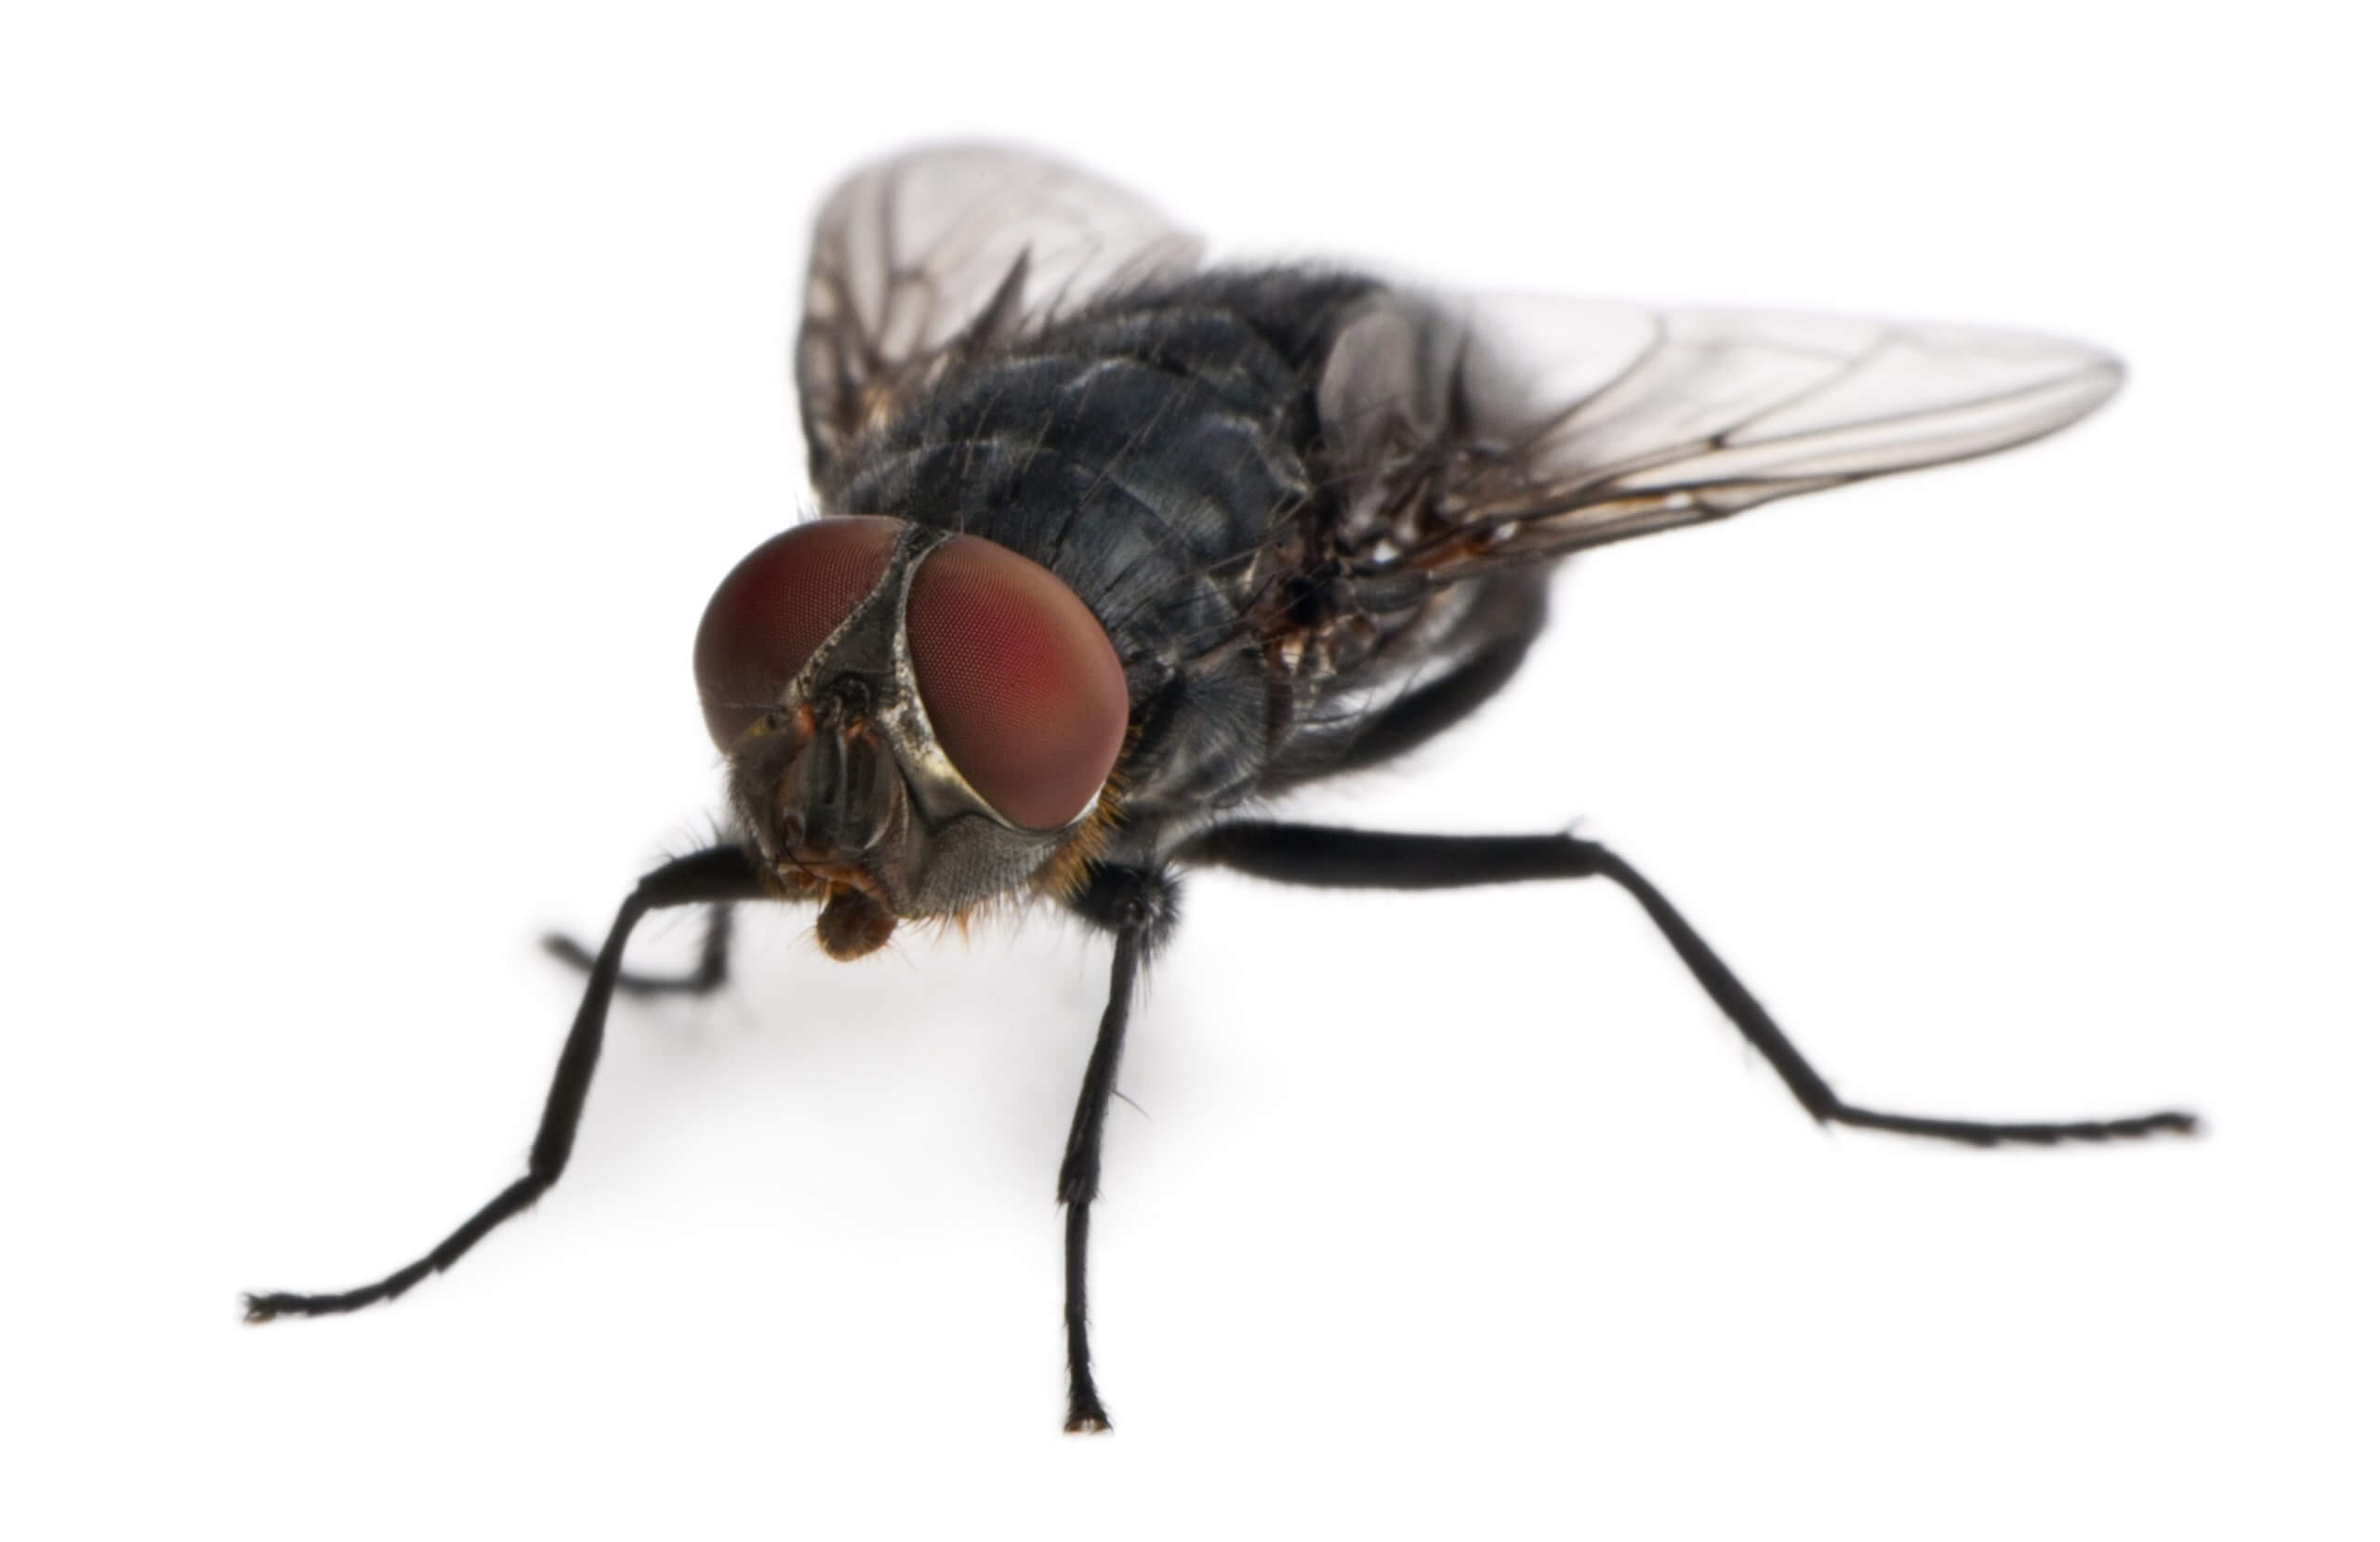 A close-up image of a house fly.